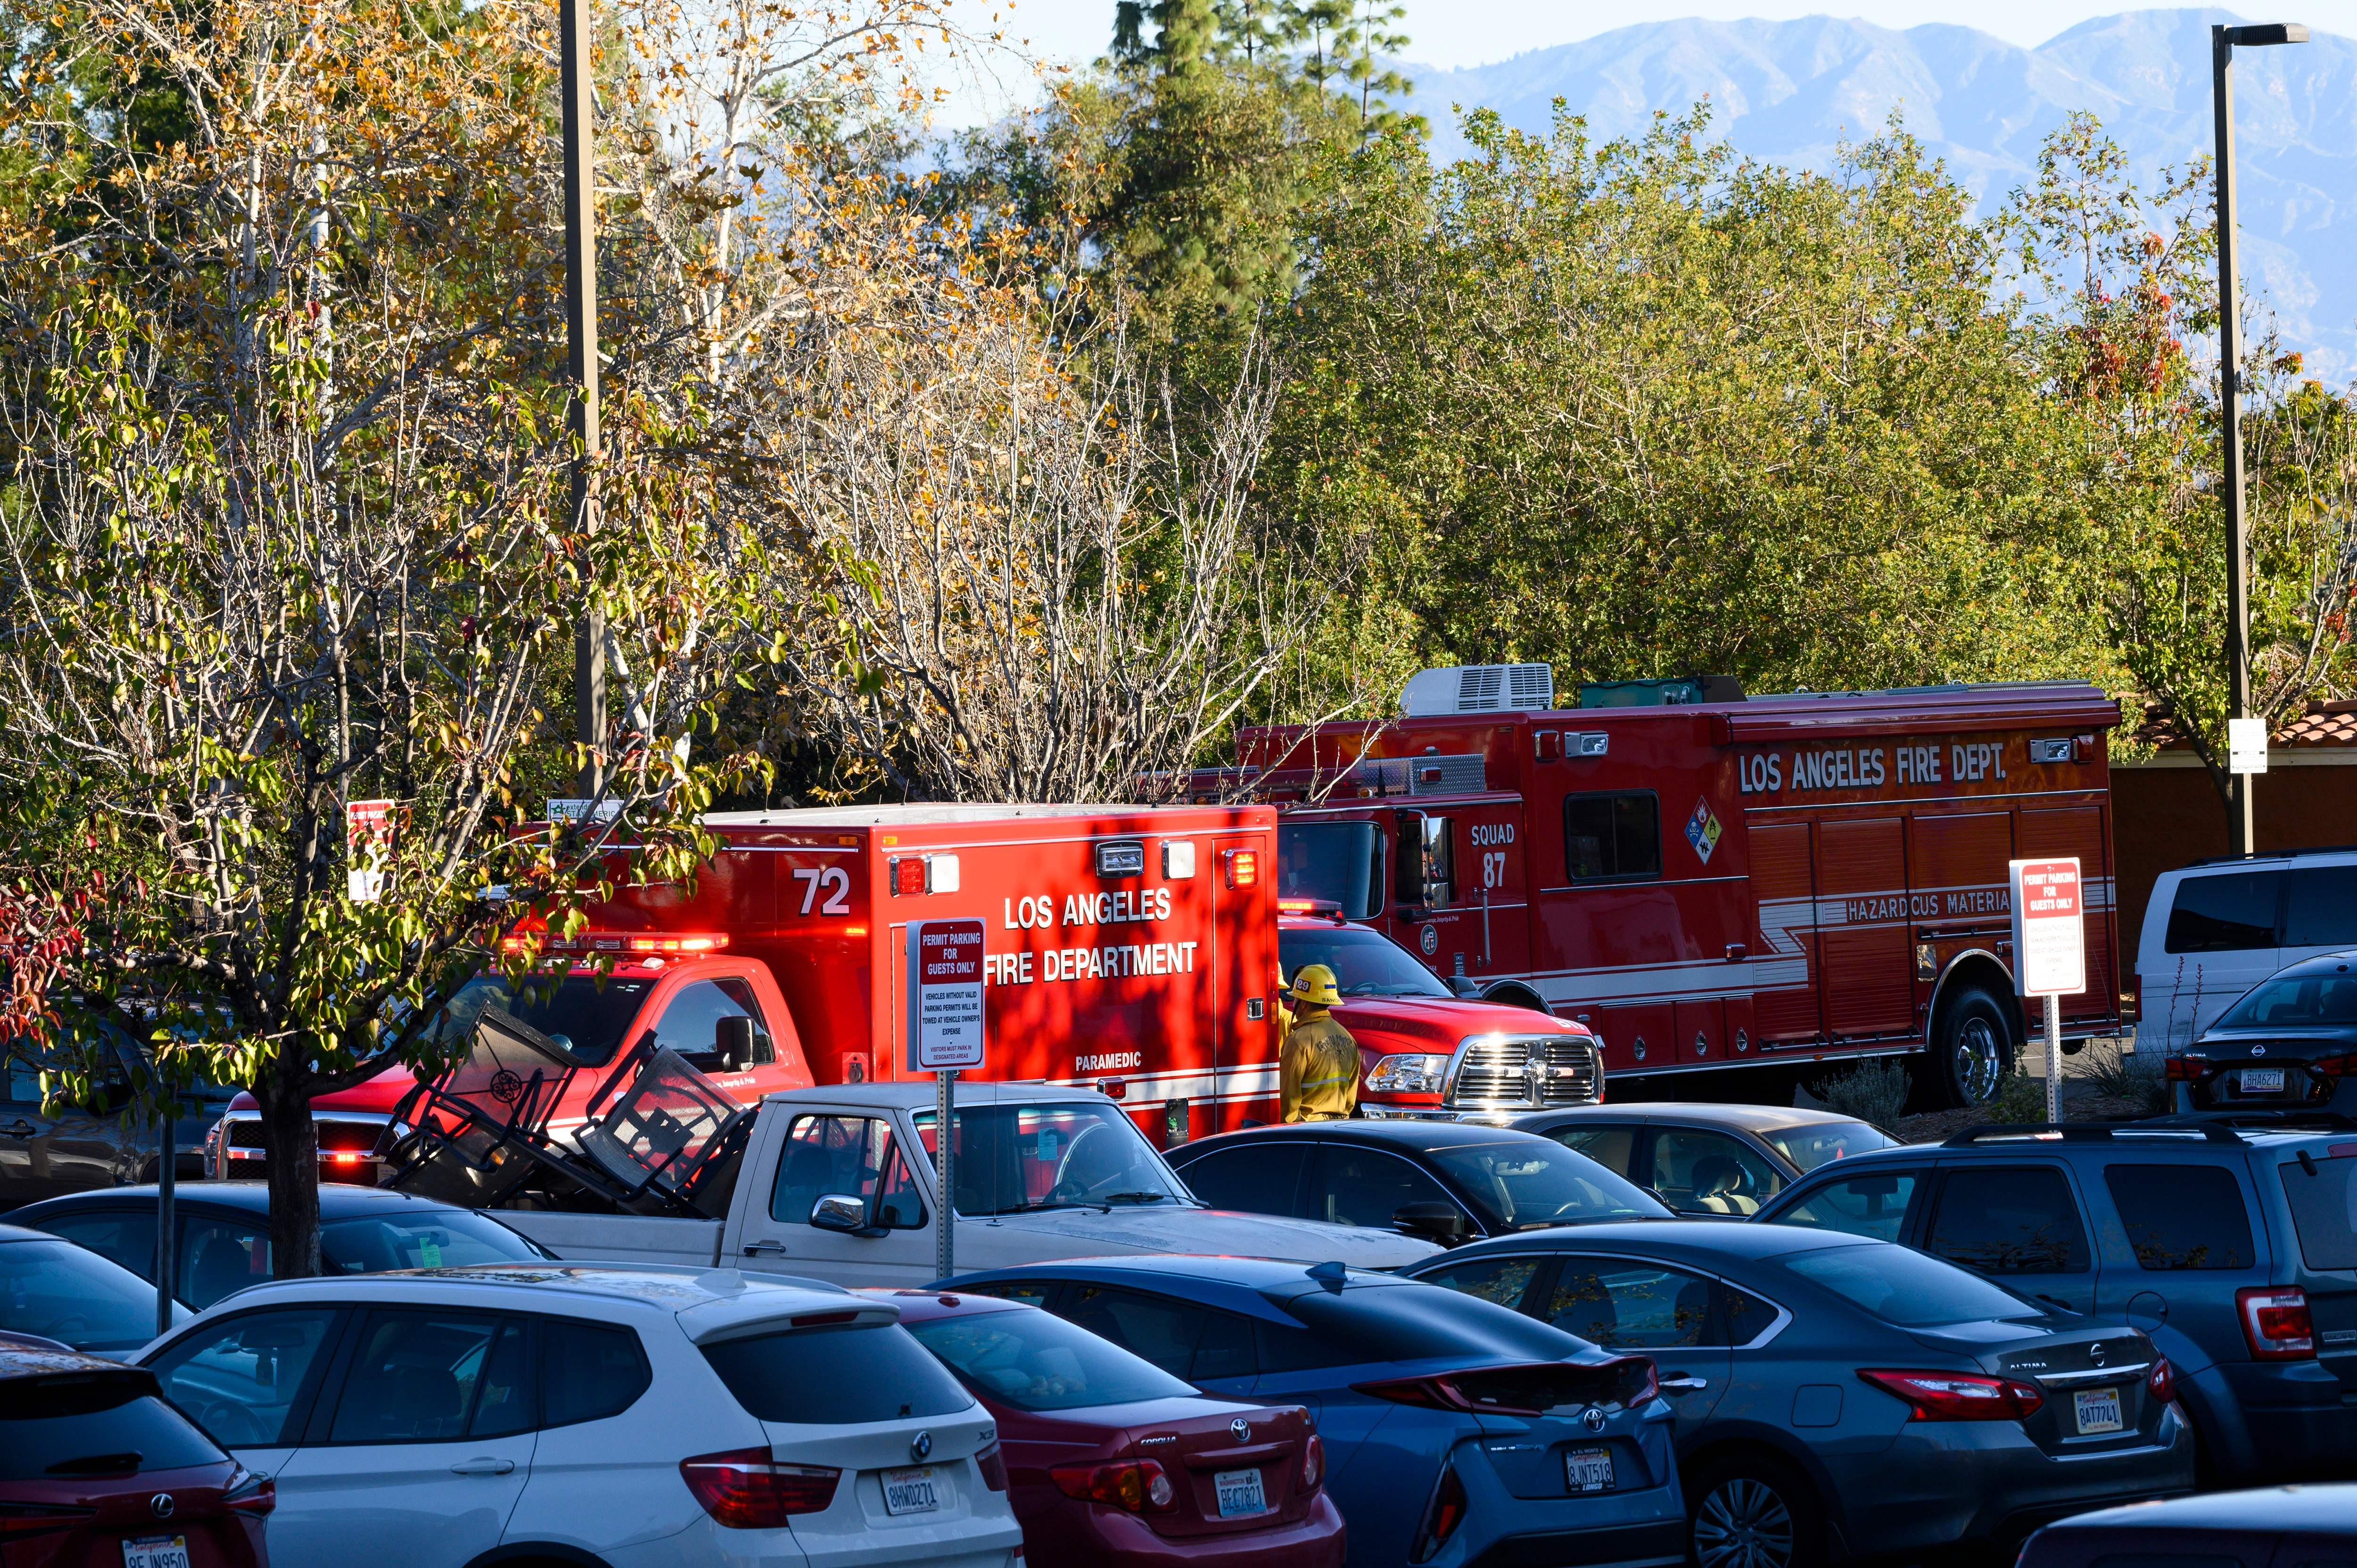 Fire and hazmat personnel investigate after four people were take to the hospital with possible fentanyl exposure, at a hotel in the Woodland Hills neighborhood of Los Angeles, California, December 31, 2019. - Authorities said one victim was in grave condition and three others in fair but stable condition. (Photo by Robyn Beck / AFP) (Photo by ROBYN BECK/AFP via Getty Images)